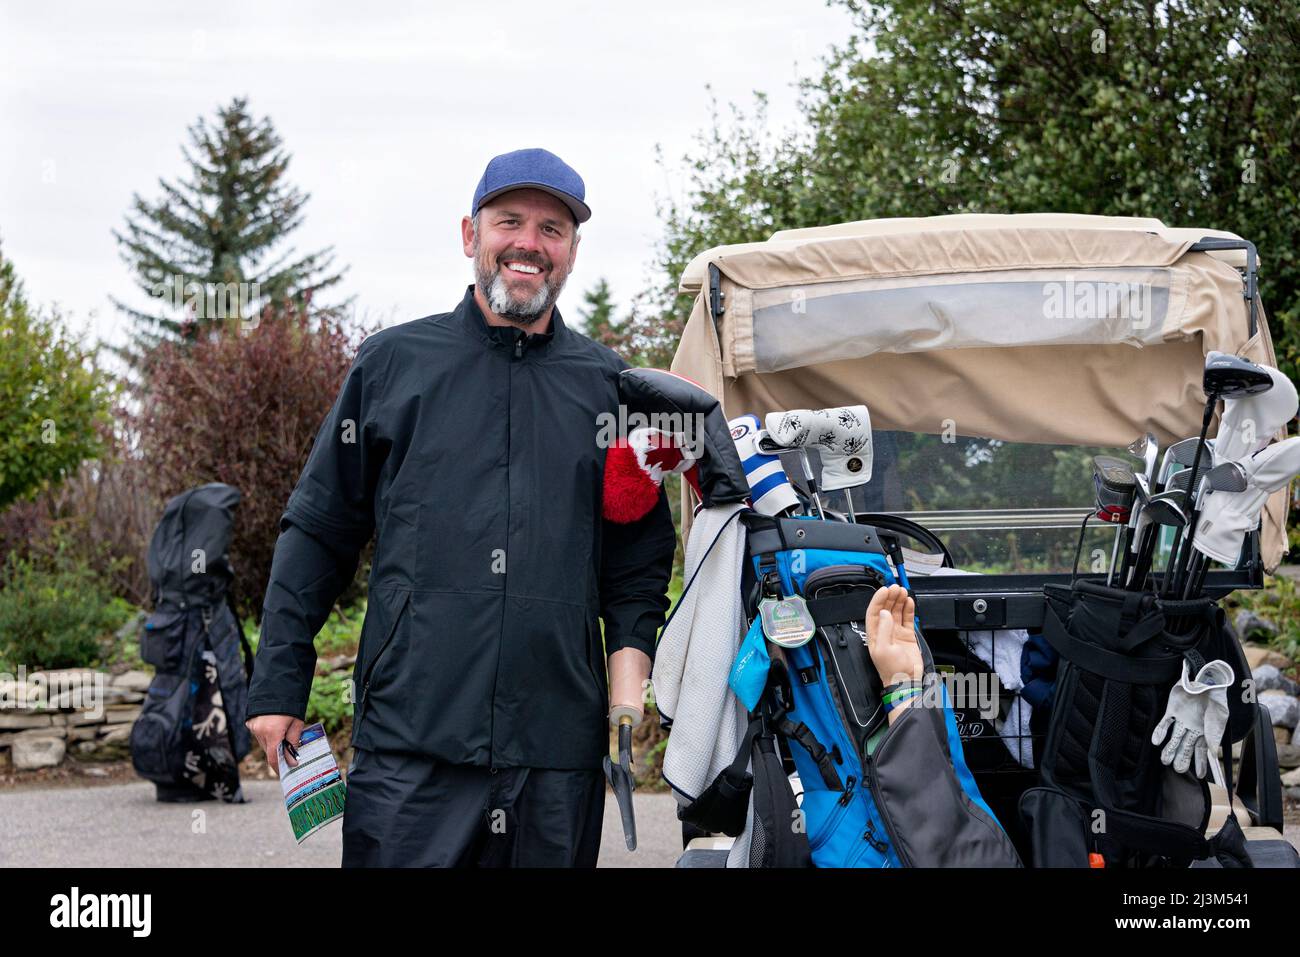 Golfer with arm prothesis standing beside a golf cart at a golf course; Okotoks, Alberta, Canada Stock Photo